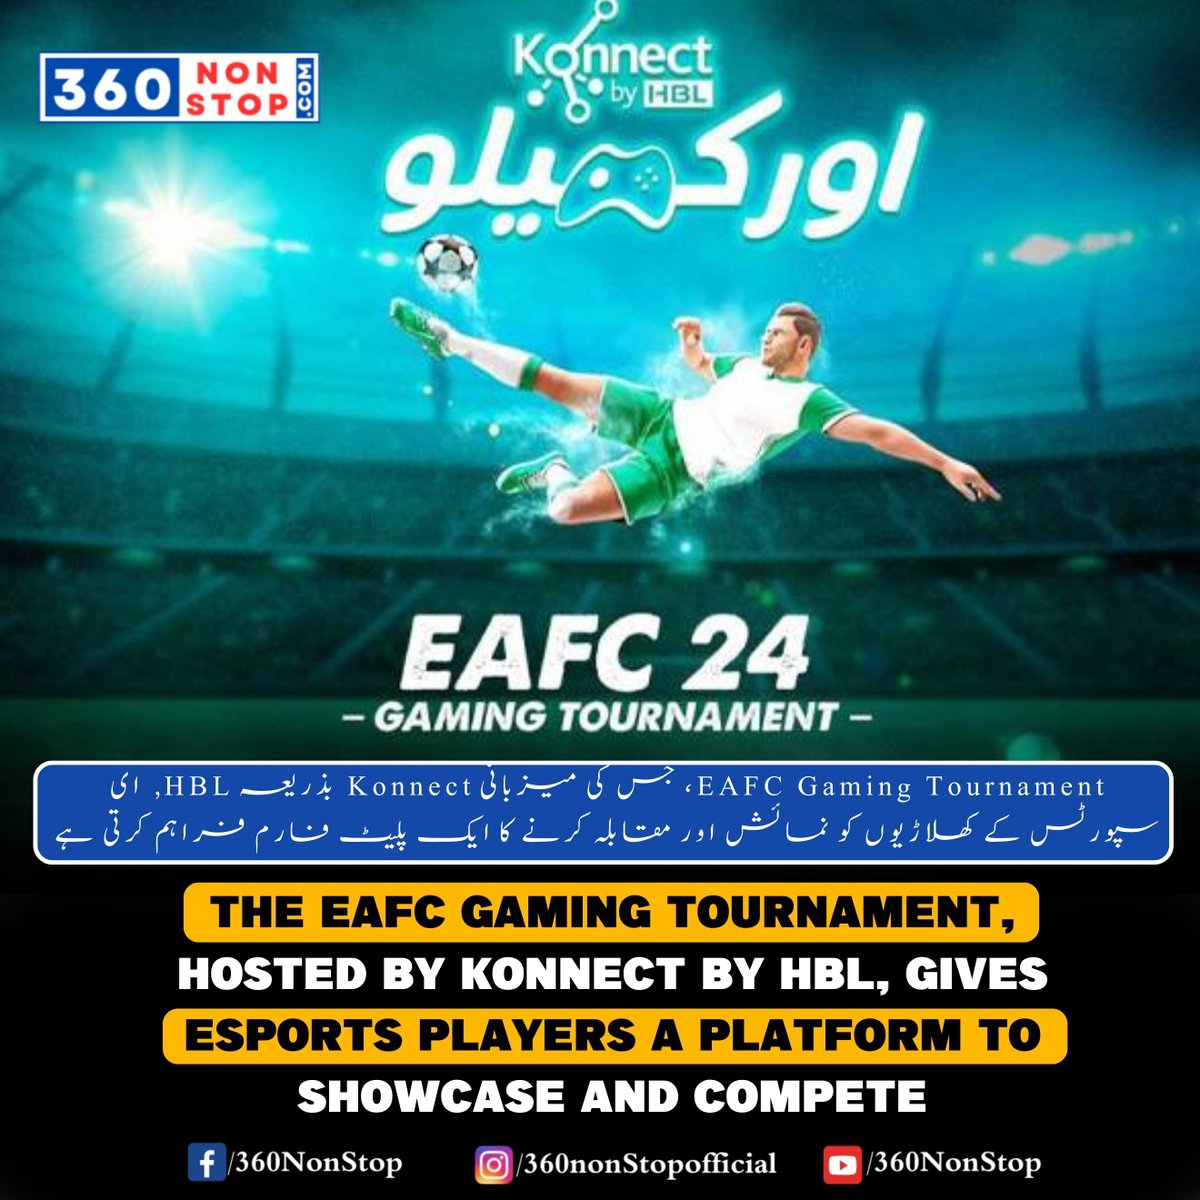 🎮 Esports Update: The EAFC Gaming Tournament, hosted by Konnect in collaboration with HBL, provides a platform for esports players to showcase their skills and compete in thrilling competitions. 🌐🕹️ #EAFCGamingTournament #Esports #KonnectHBL #GamingCompetition #360NonStop